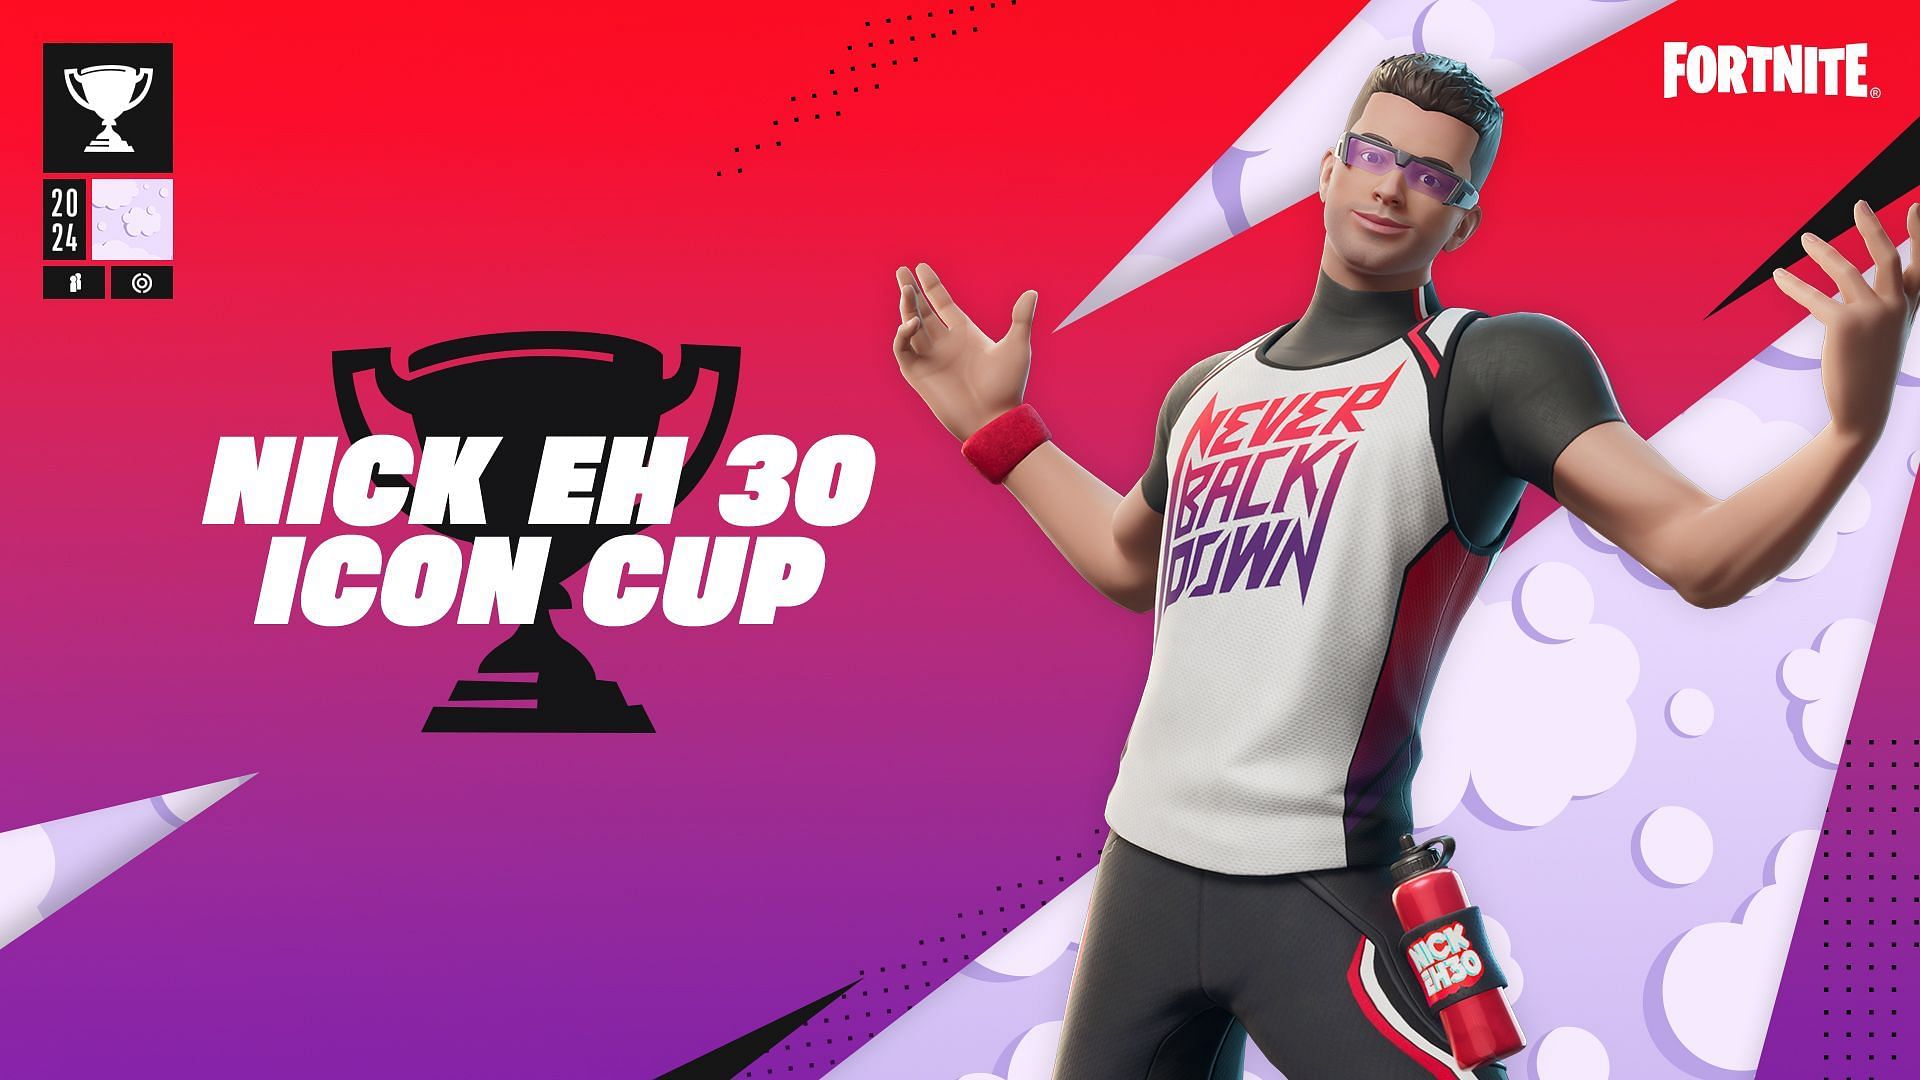 Nick Eh 30 Icon Cup